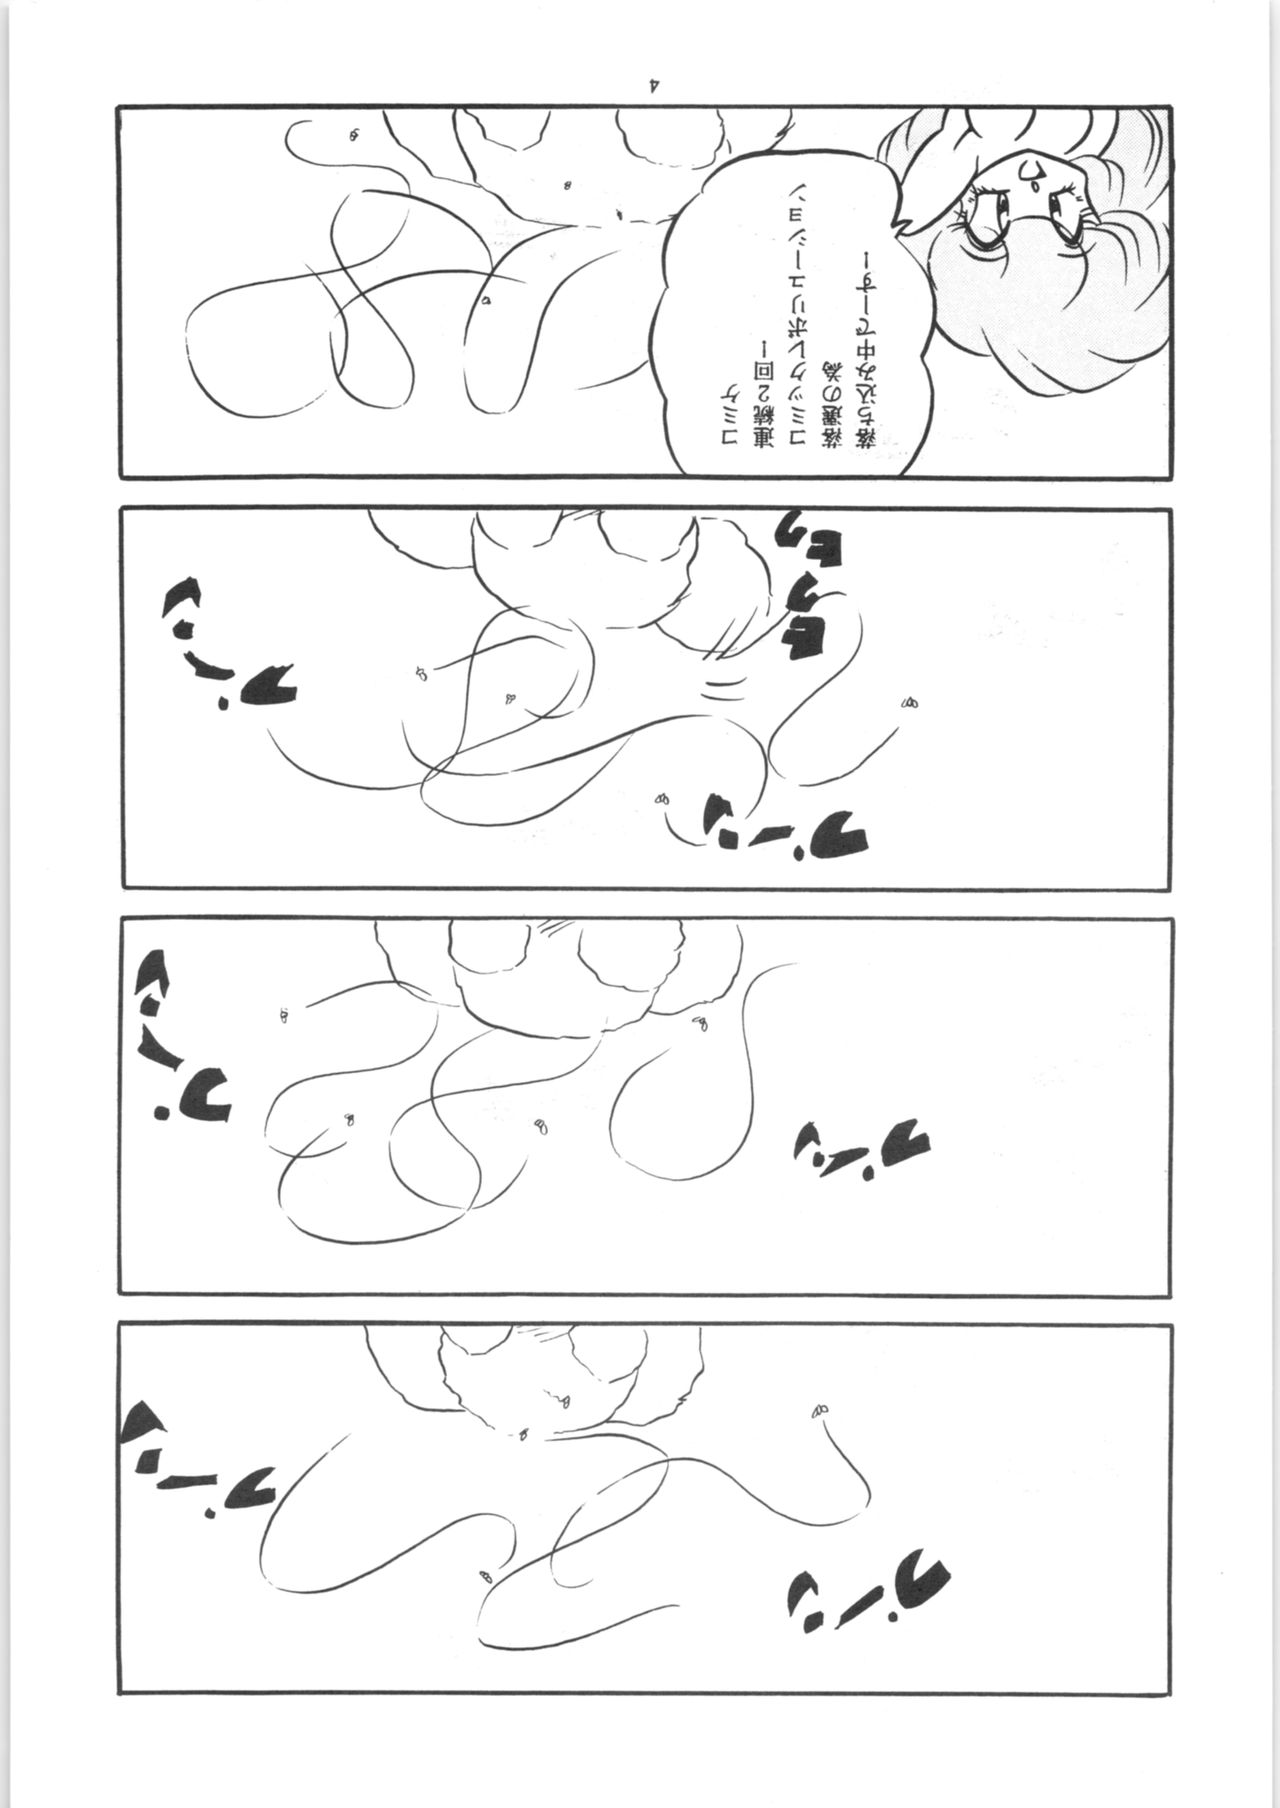 [C-COMPANY] C-COMPANY SPECIAL STAGE 18 (Ranma 1/2, Idol Project) page 4 full